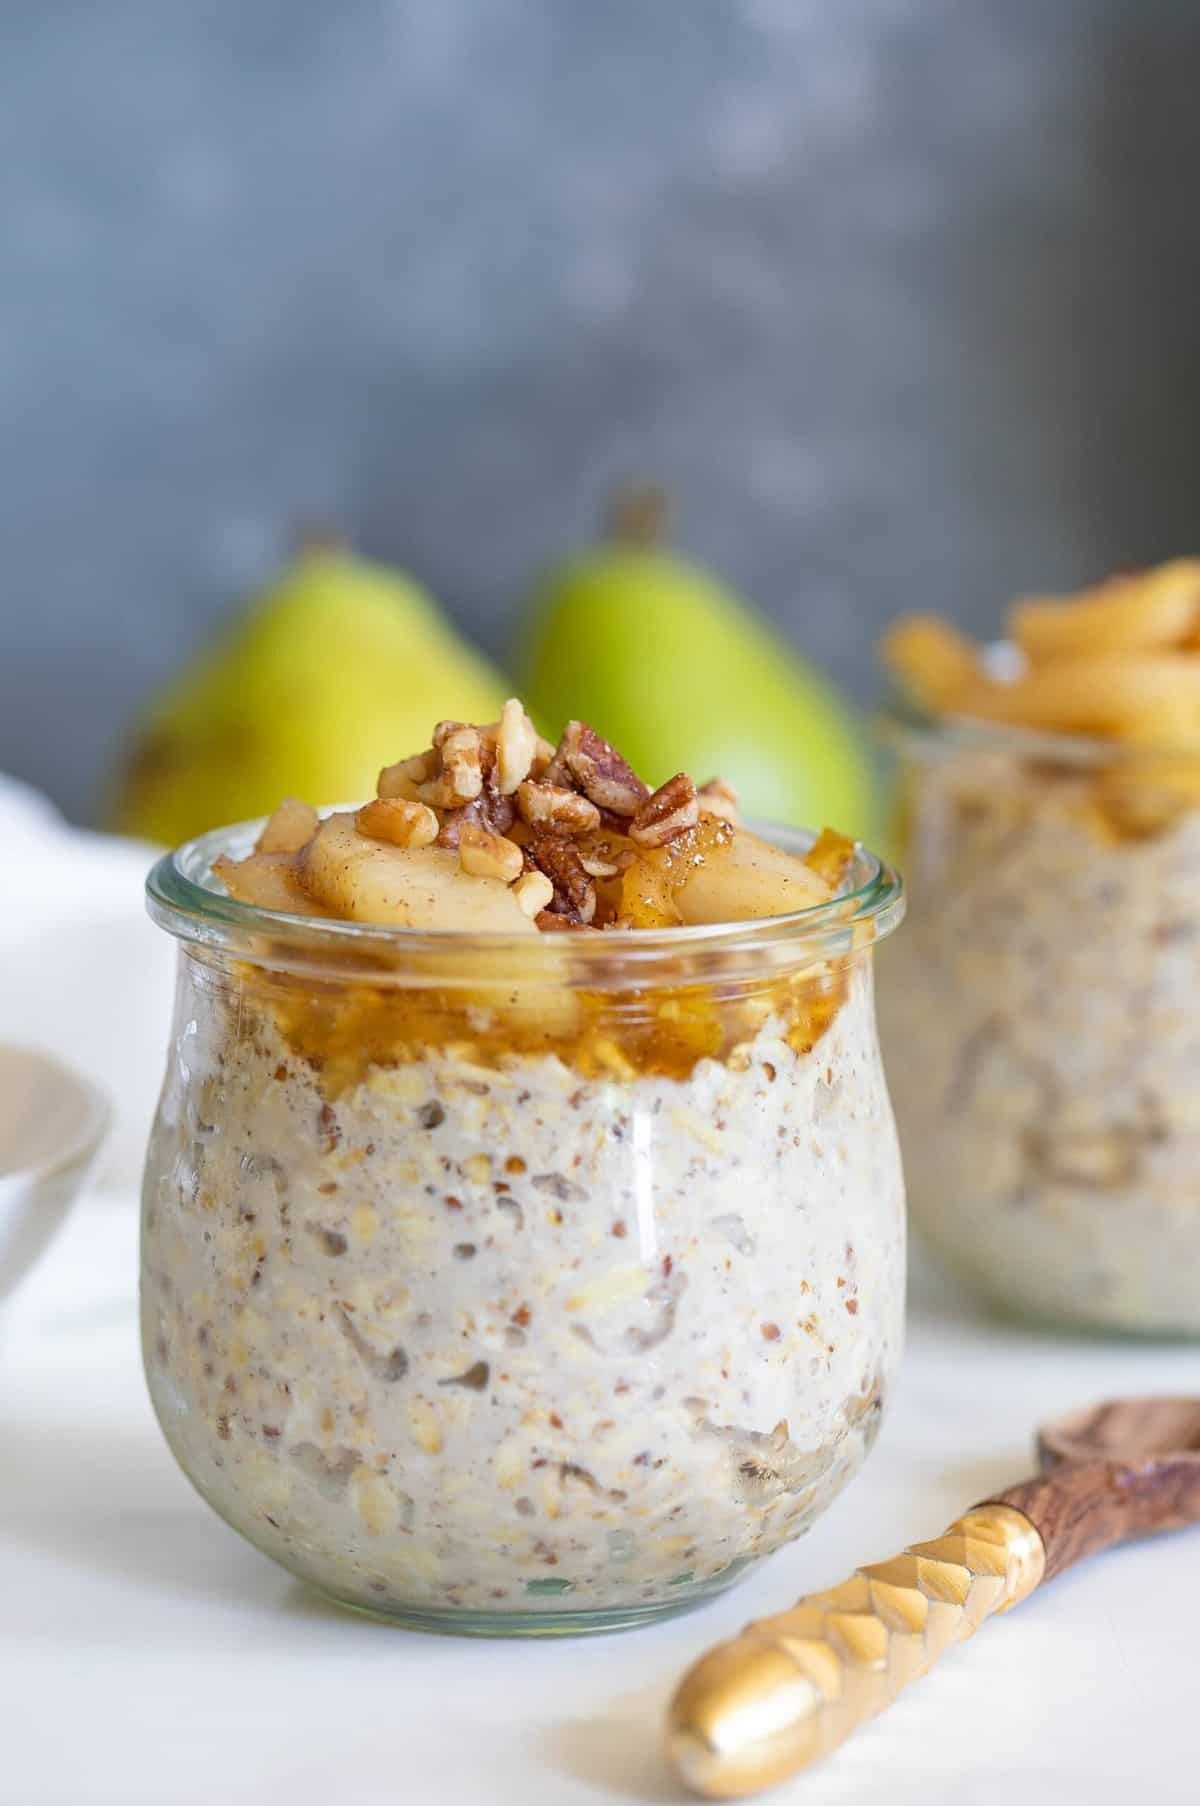 Overnight Oats Recipe - NYT Cooking